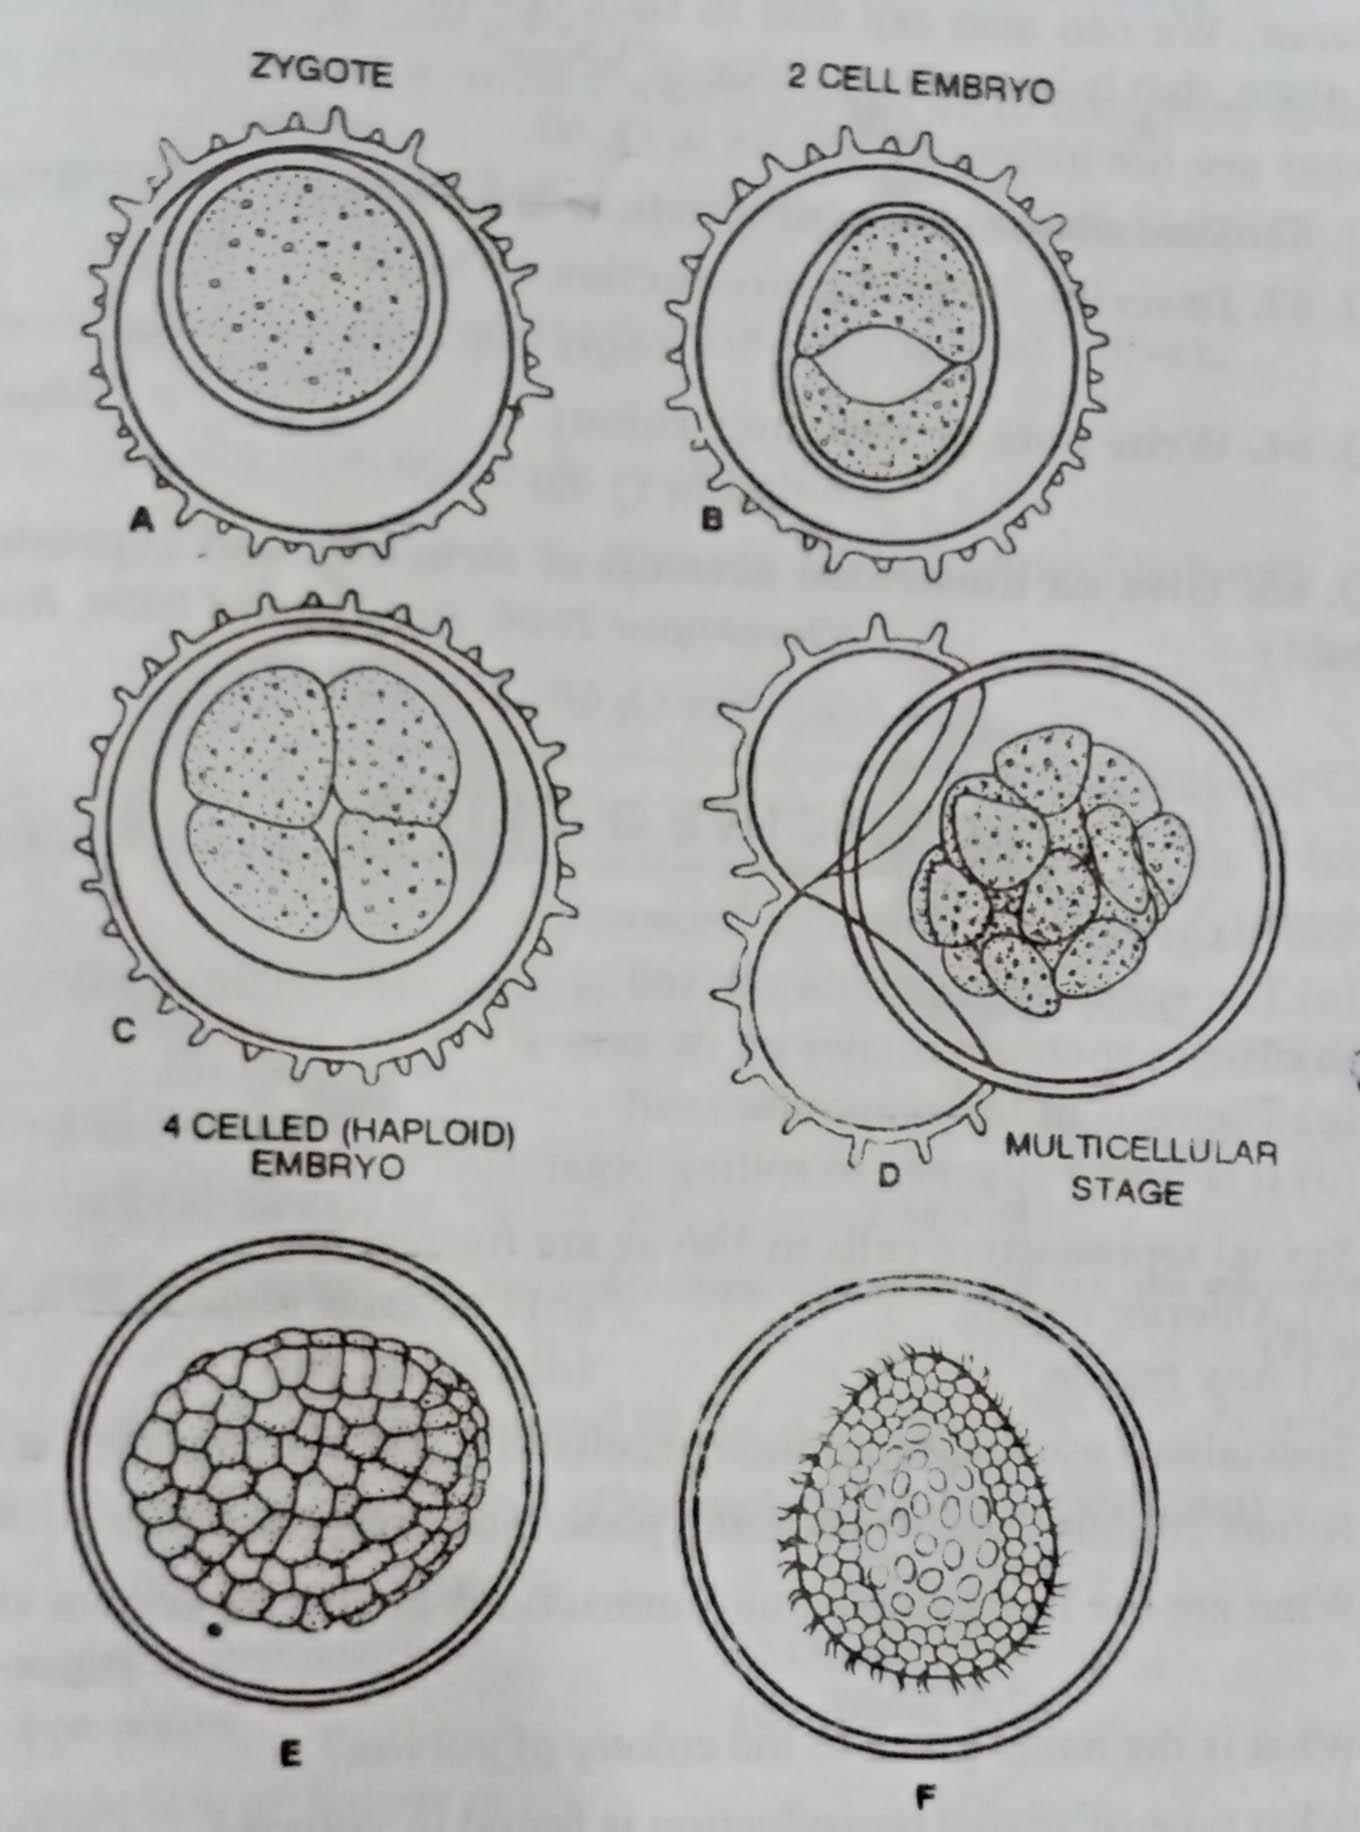 Development of Young Coenobium from the Zygote